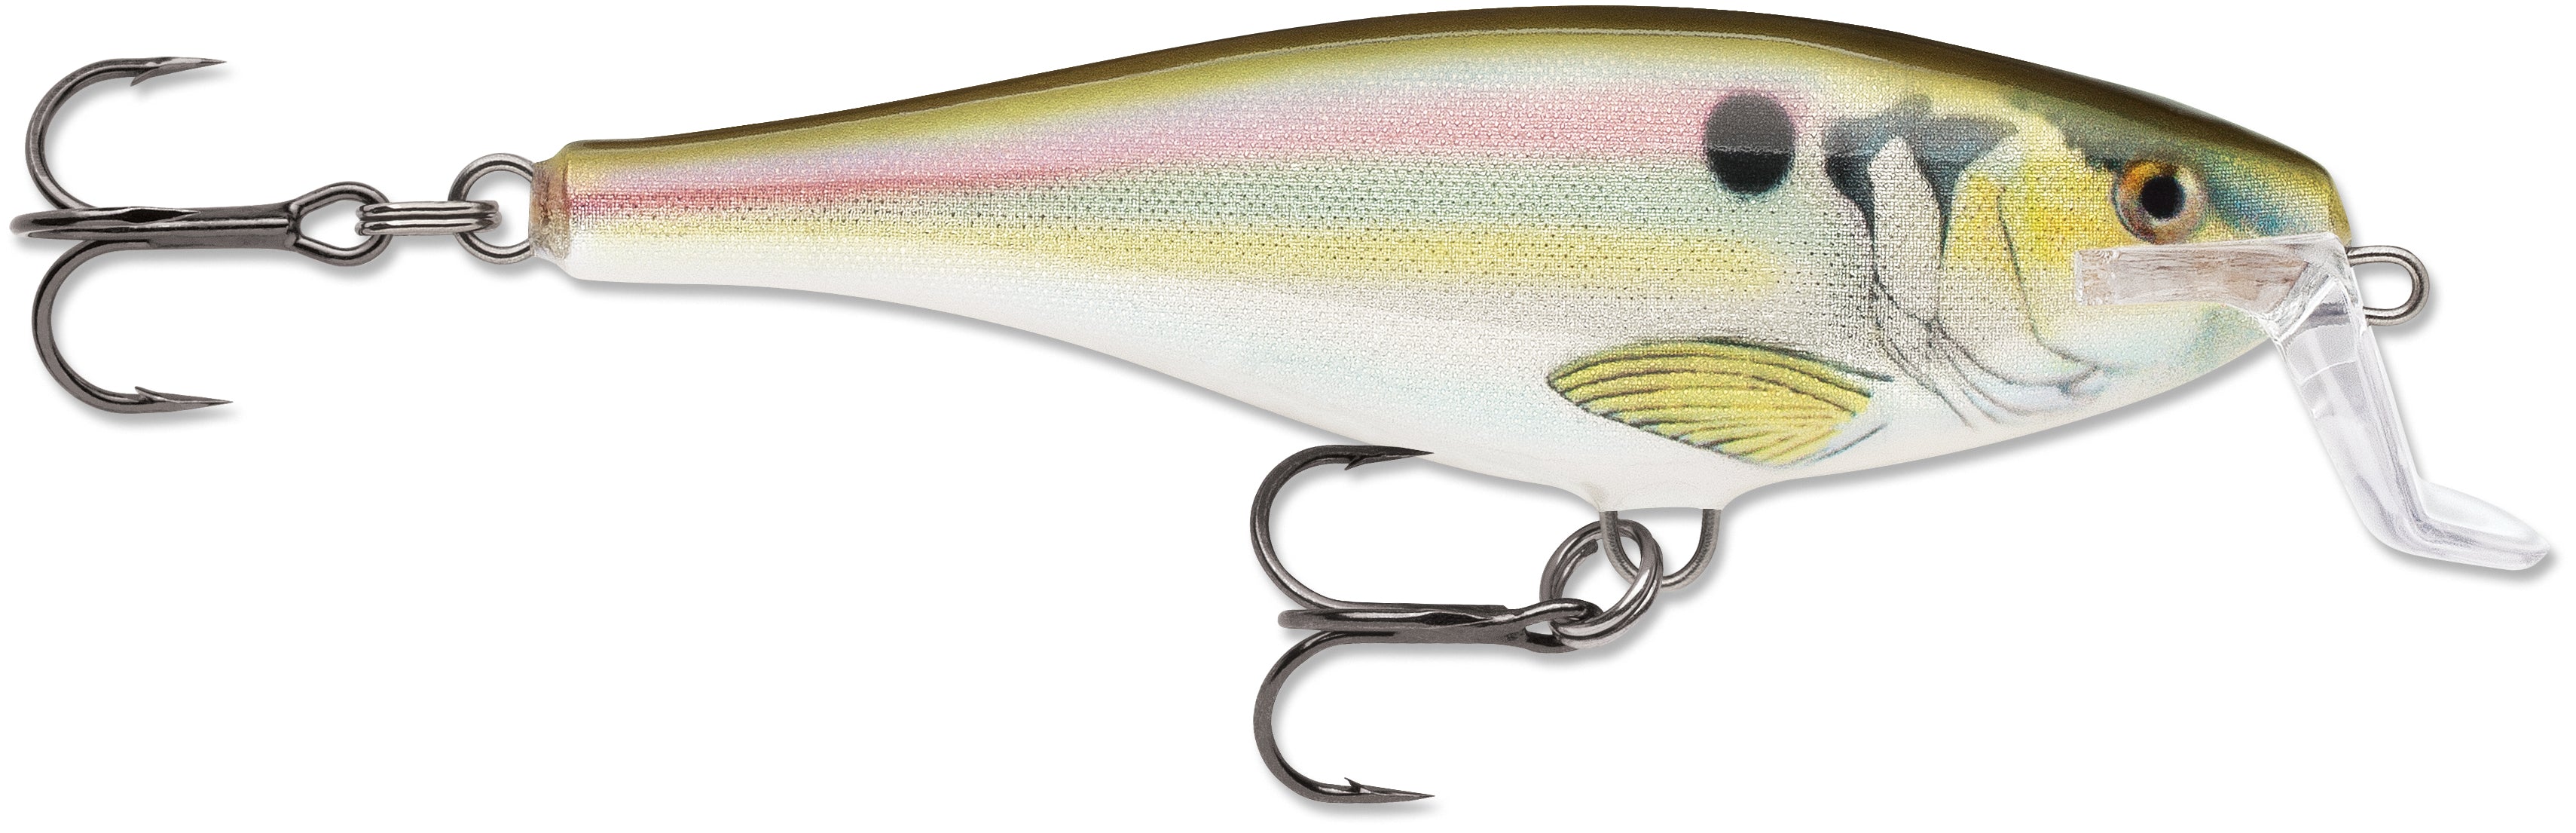  Rapala Shad Rap Lure, Freshwater, Size 06, 2 1/2 Length,  5'-10' Depth, Crawdad, Package of 1 : Fishing Topwater Lures And Crankbaits  : Sports & Outdoors